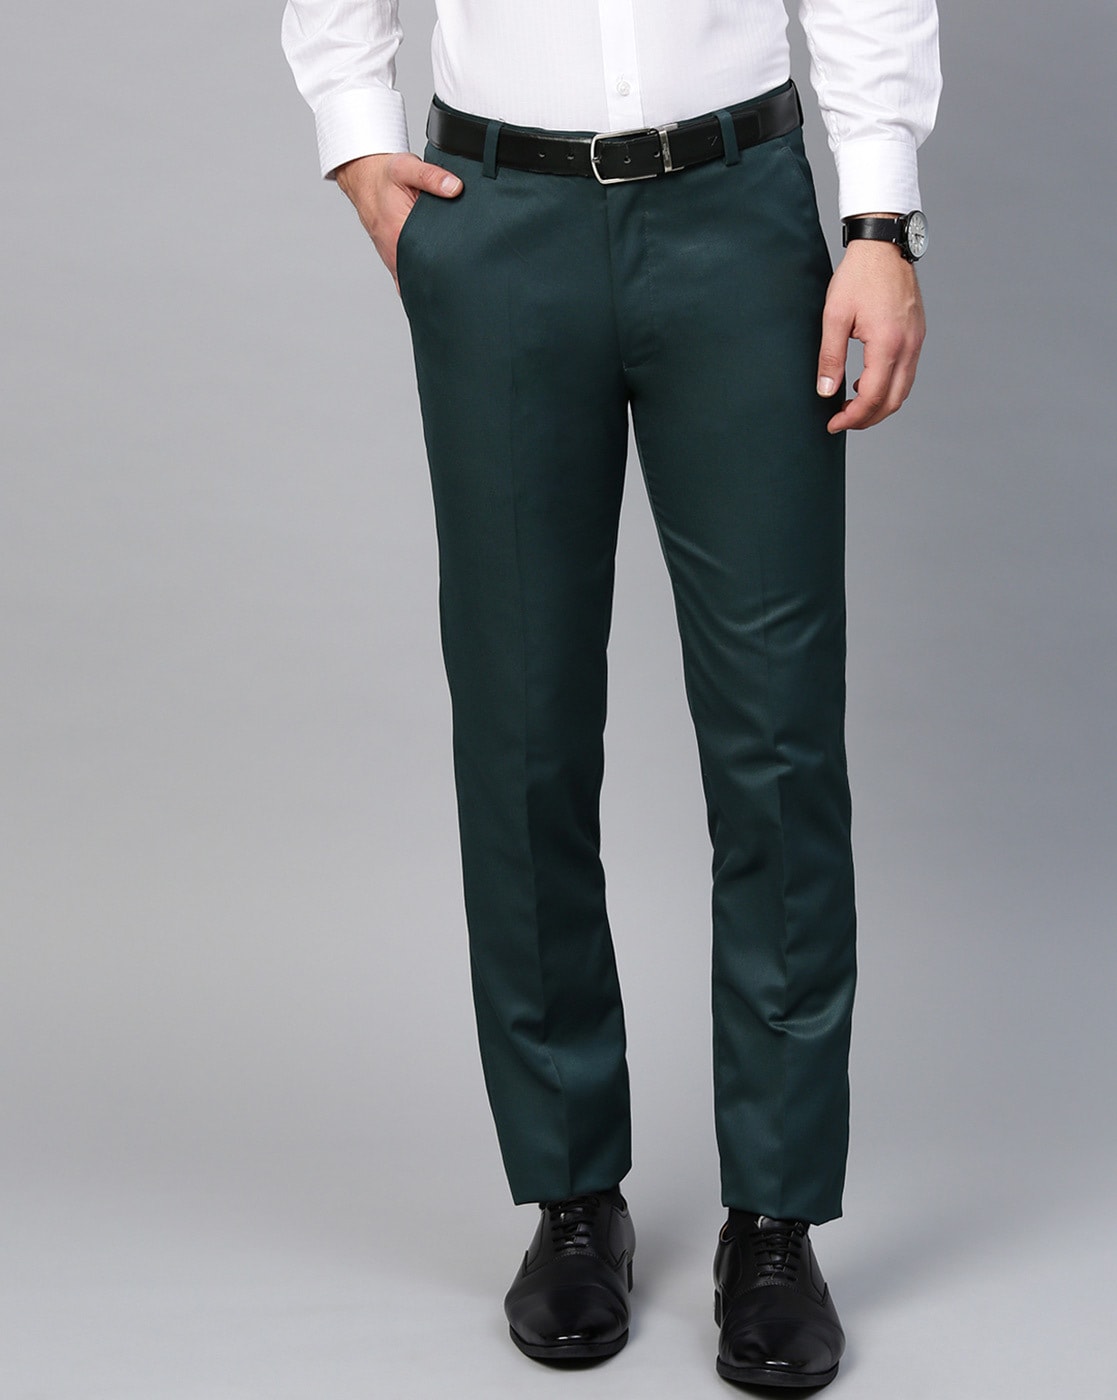 Burberry Prorsum Dark Green Slim Fit Mohair And Wool Blend Suit Trousers  795  MR PORTER  Lookastic